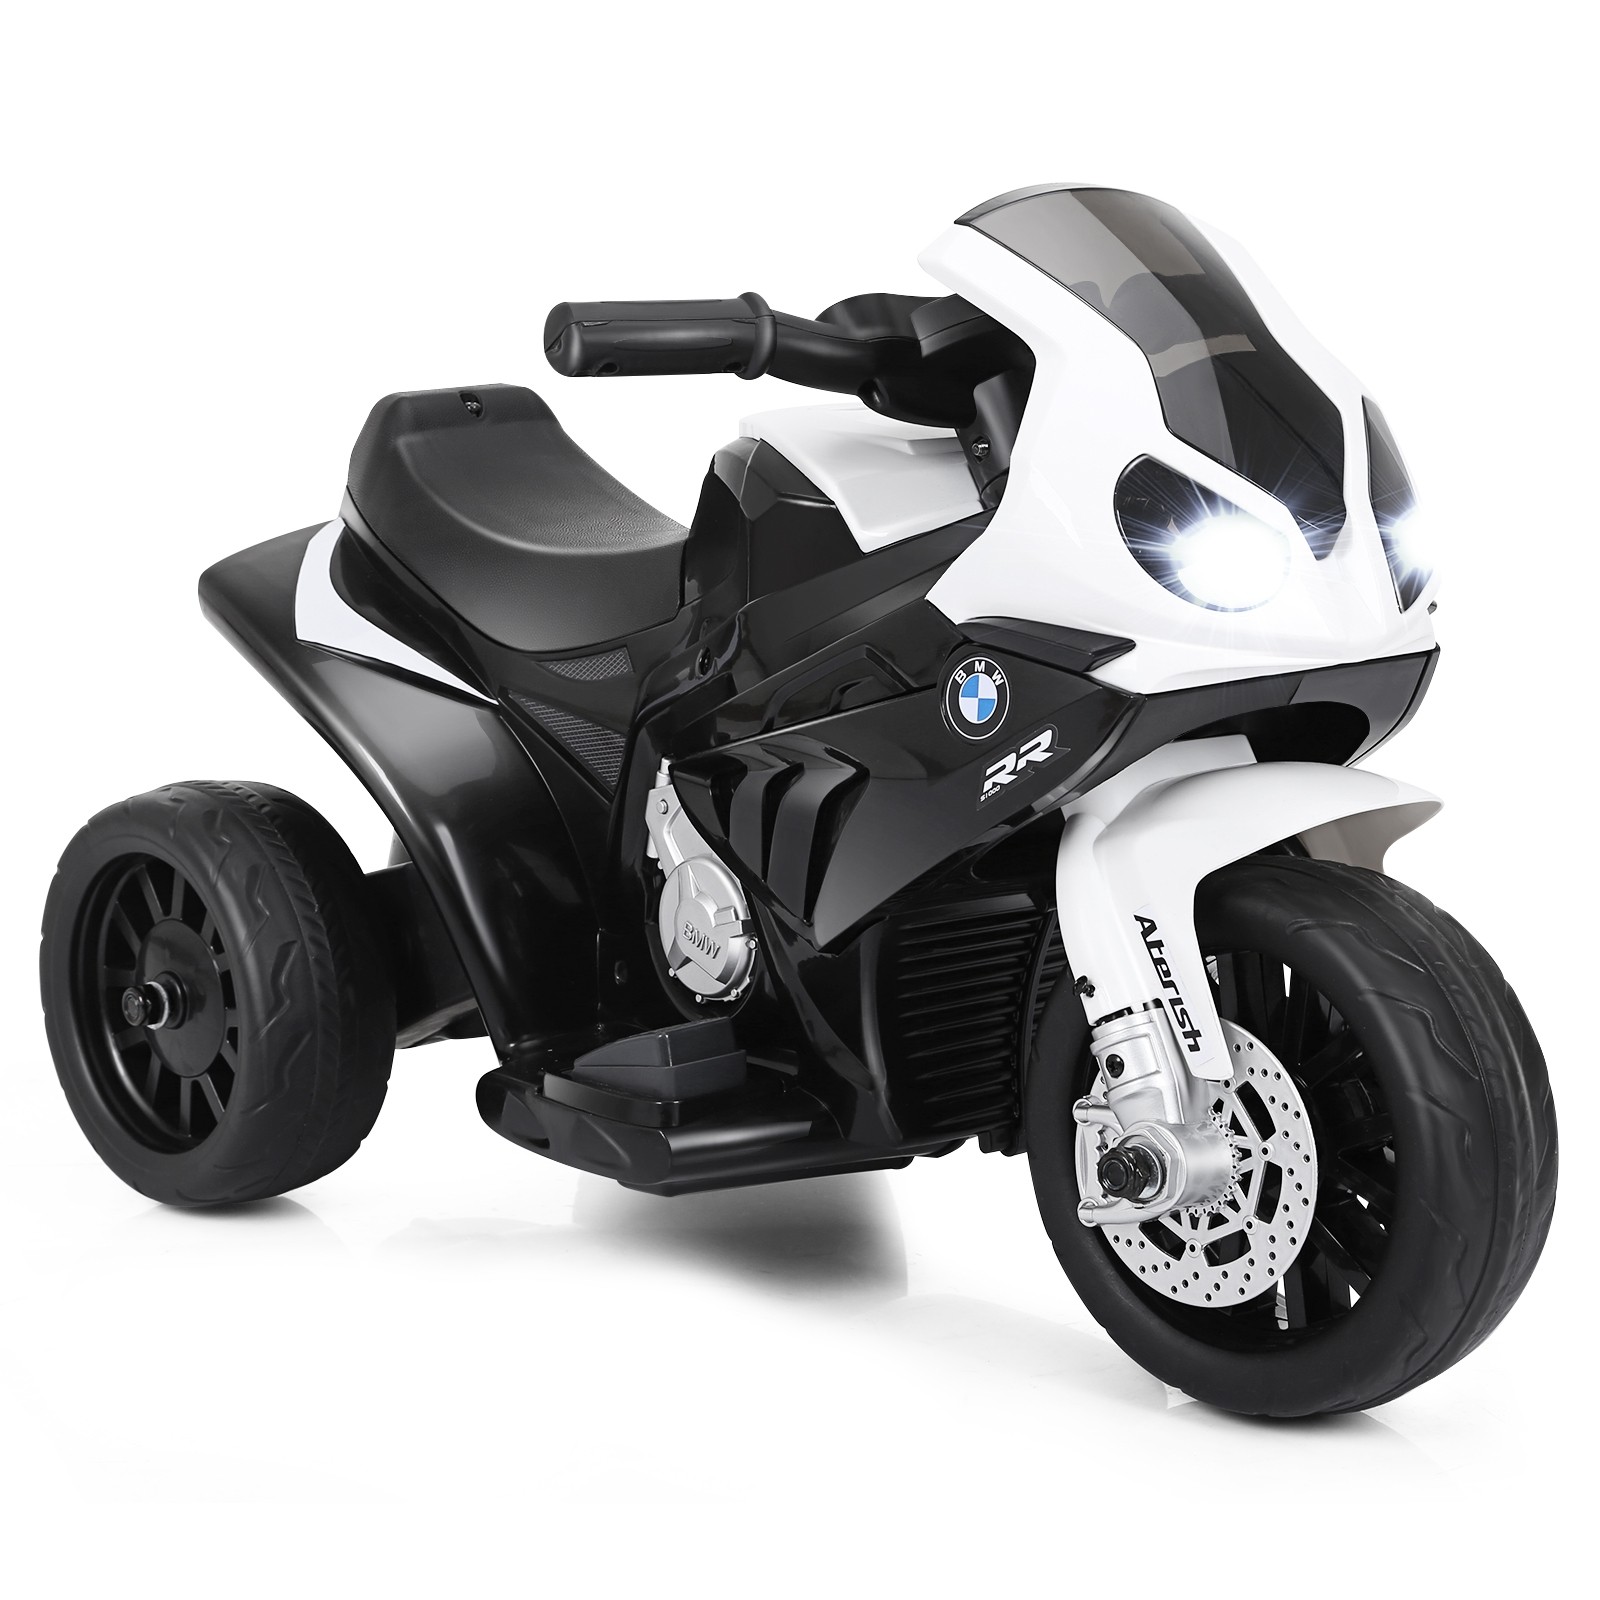 Costway 6V Kids 3 Wheels Riding BMW Licensed Electric Motorcycle $73.95 + Free Shipping